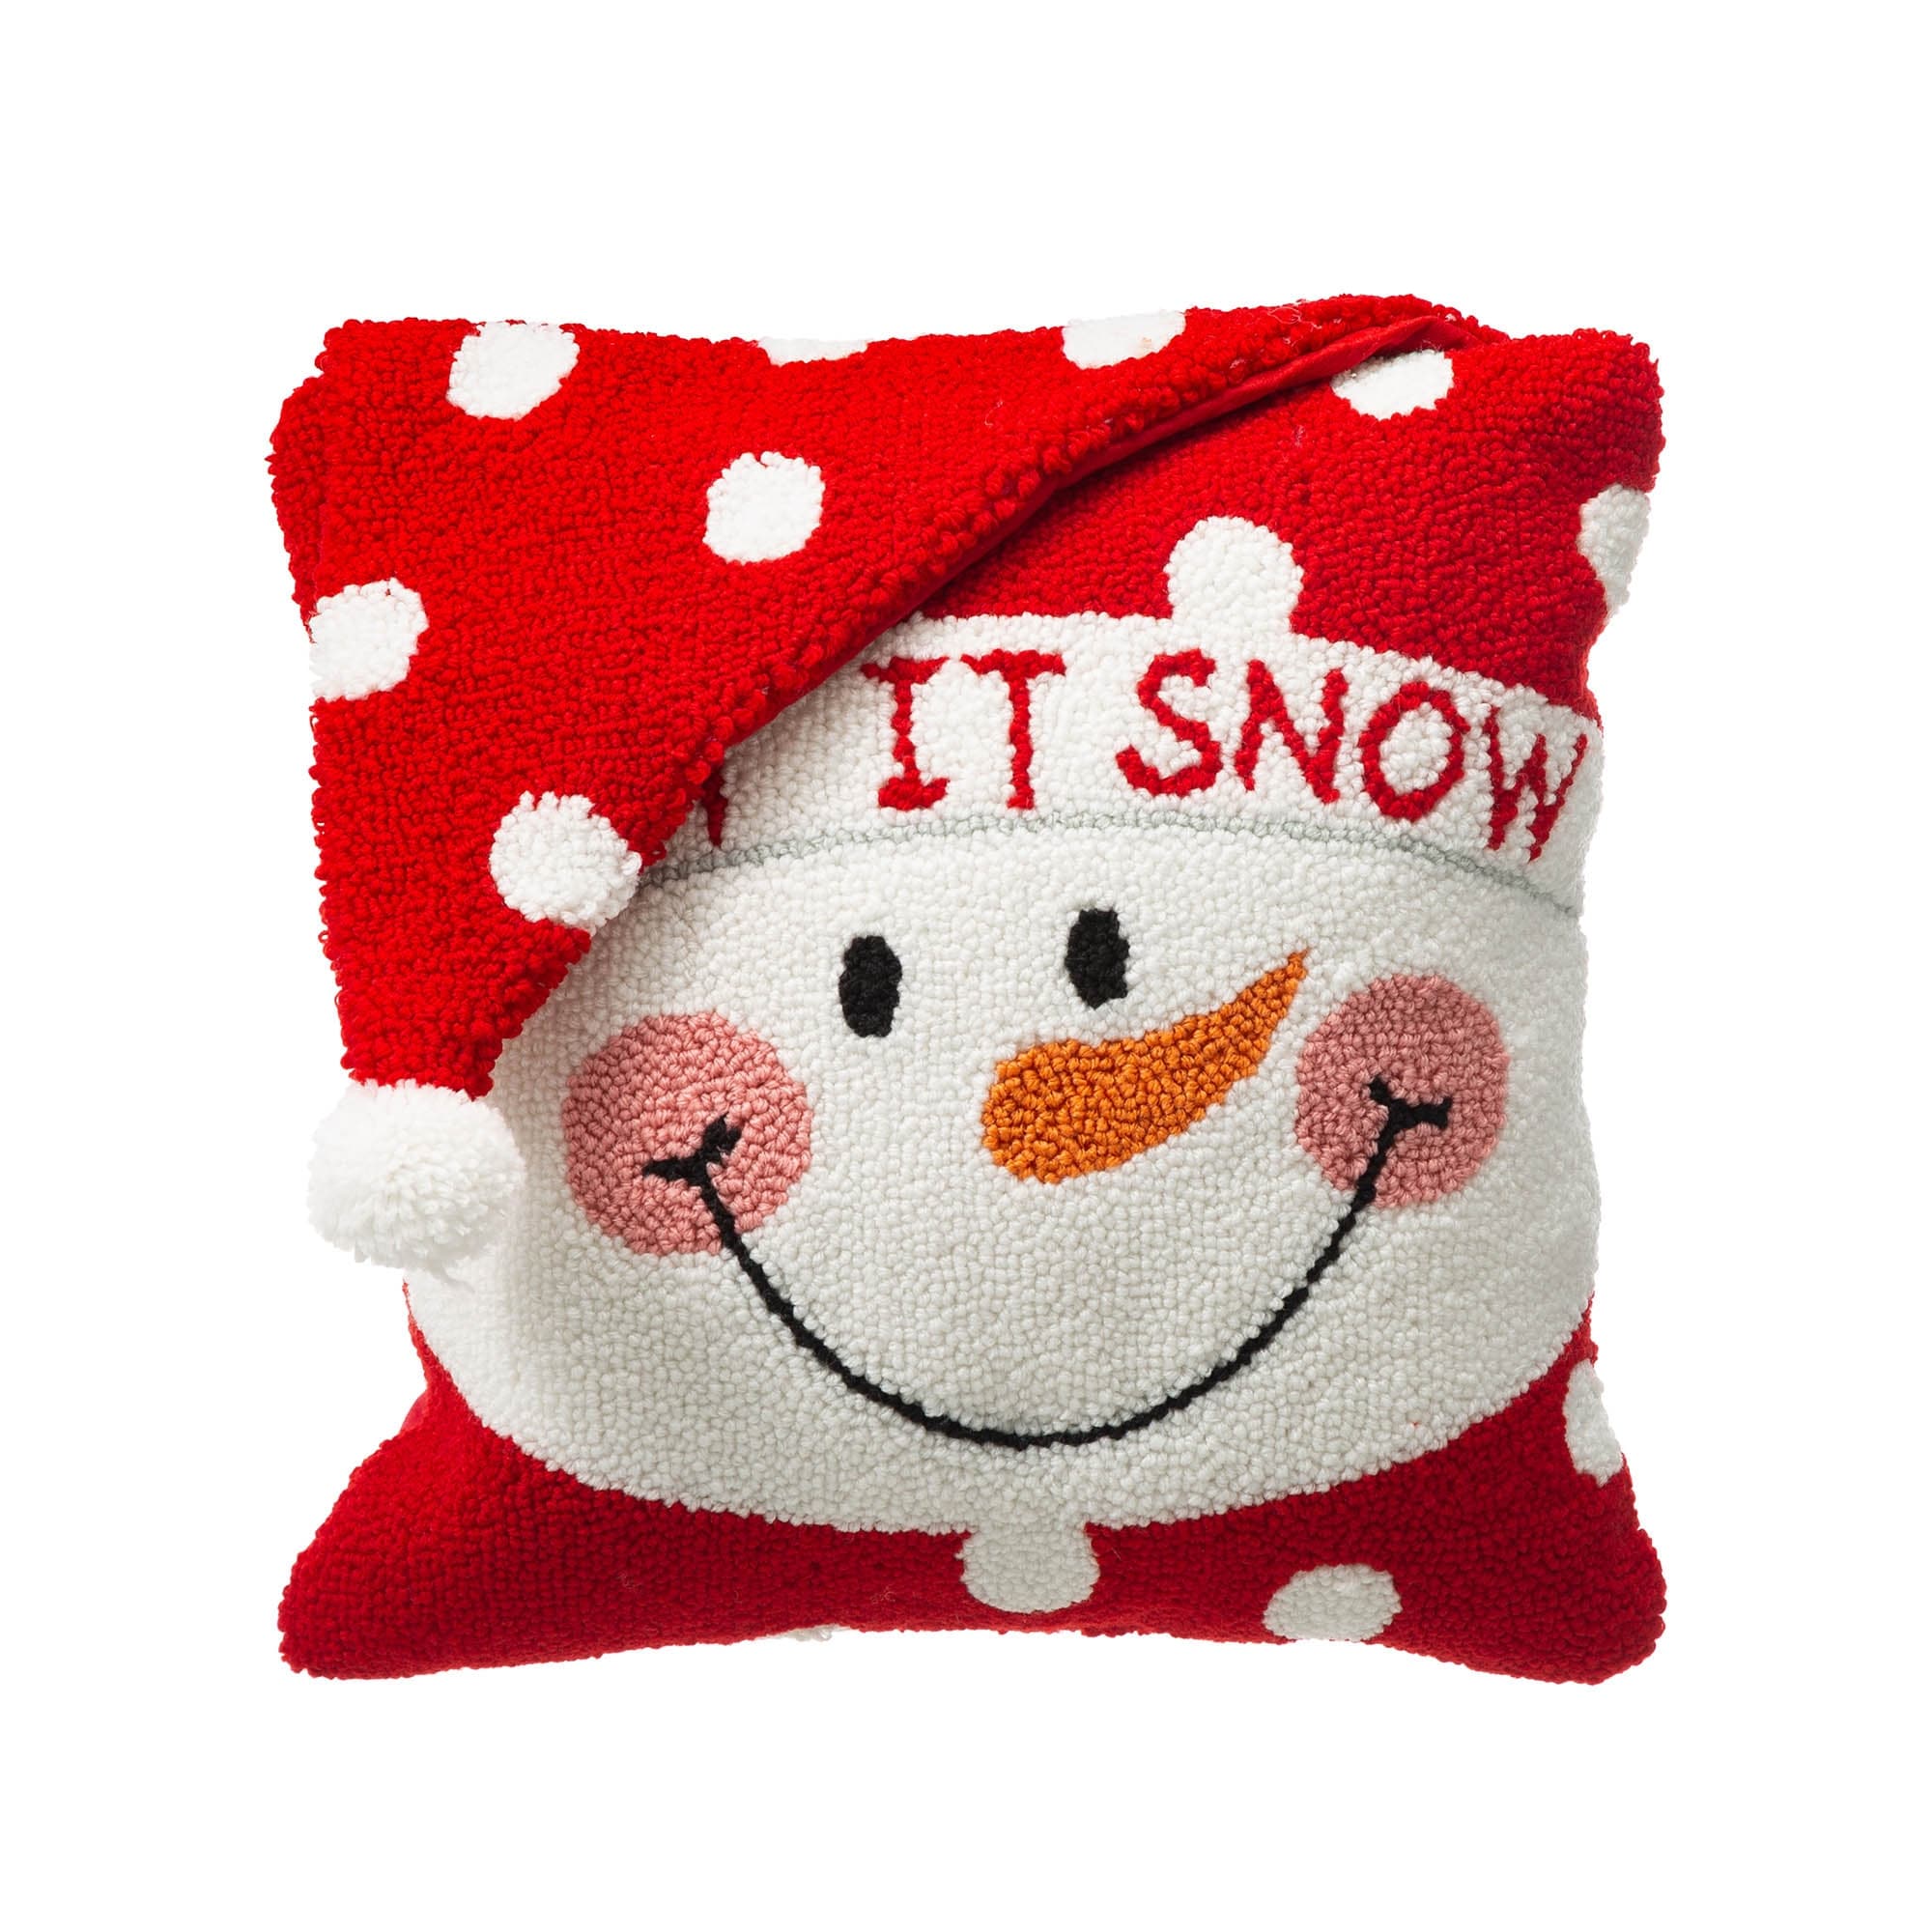 Glitzhome 14L Hooked 3D Christmas Pillow - On Sale - Bed Bath & Beyond -  28865101